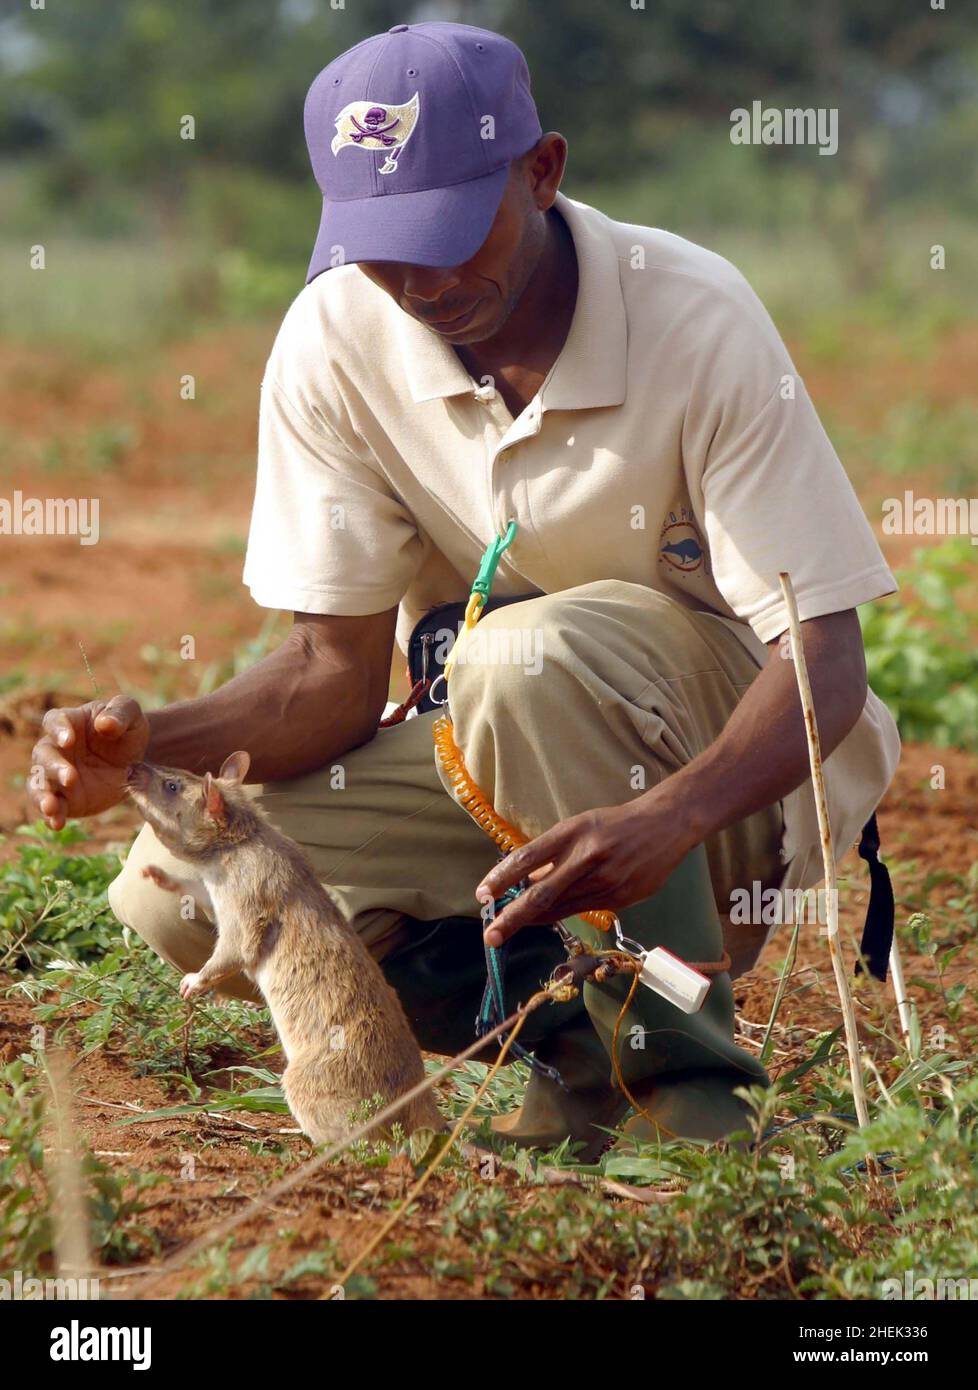 A  RAT IS REWARDED WITH FOOD AFTER LOCATING A LANDMINE IN A SIMULATED MINEFIELD AT THE APOPO TRAINING CENTRE, SOKOINE UNIVERSITY OF AGRICULTURE, MOROGORO, TANZANIA. AT THE CENTRE THE BELGIUM COMPANY (APOPO), THE BRAINCHILD OF BART WEETJENS, IS TRAINING RATS TO DETECT LANDMINES FOR USE IN WAR TORN REGIONS. Stock Photo